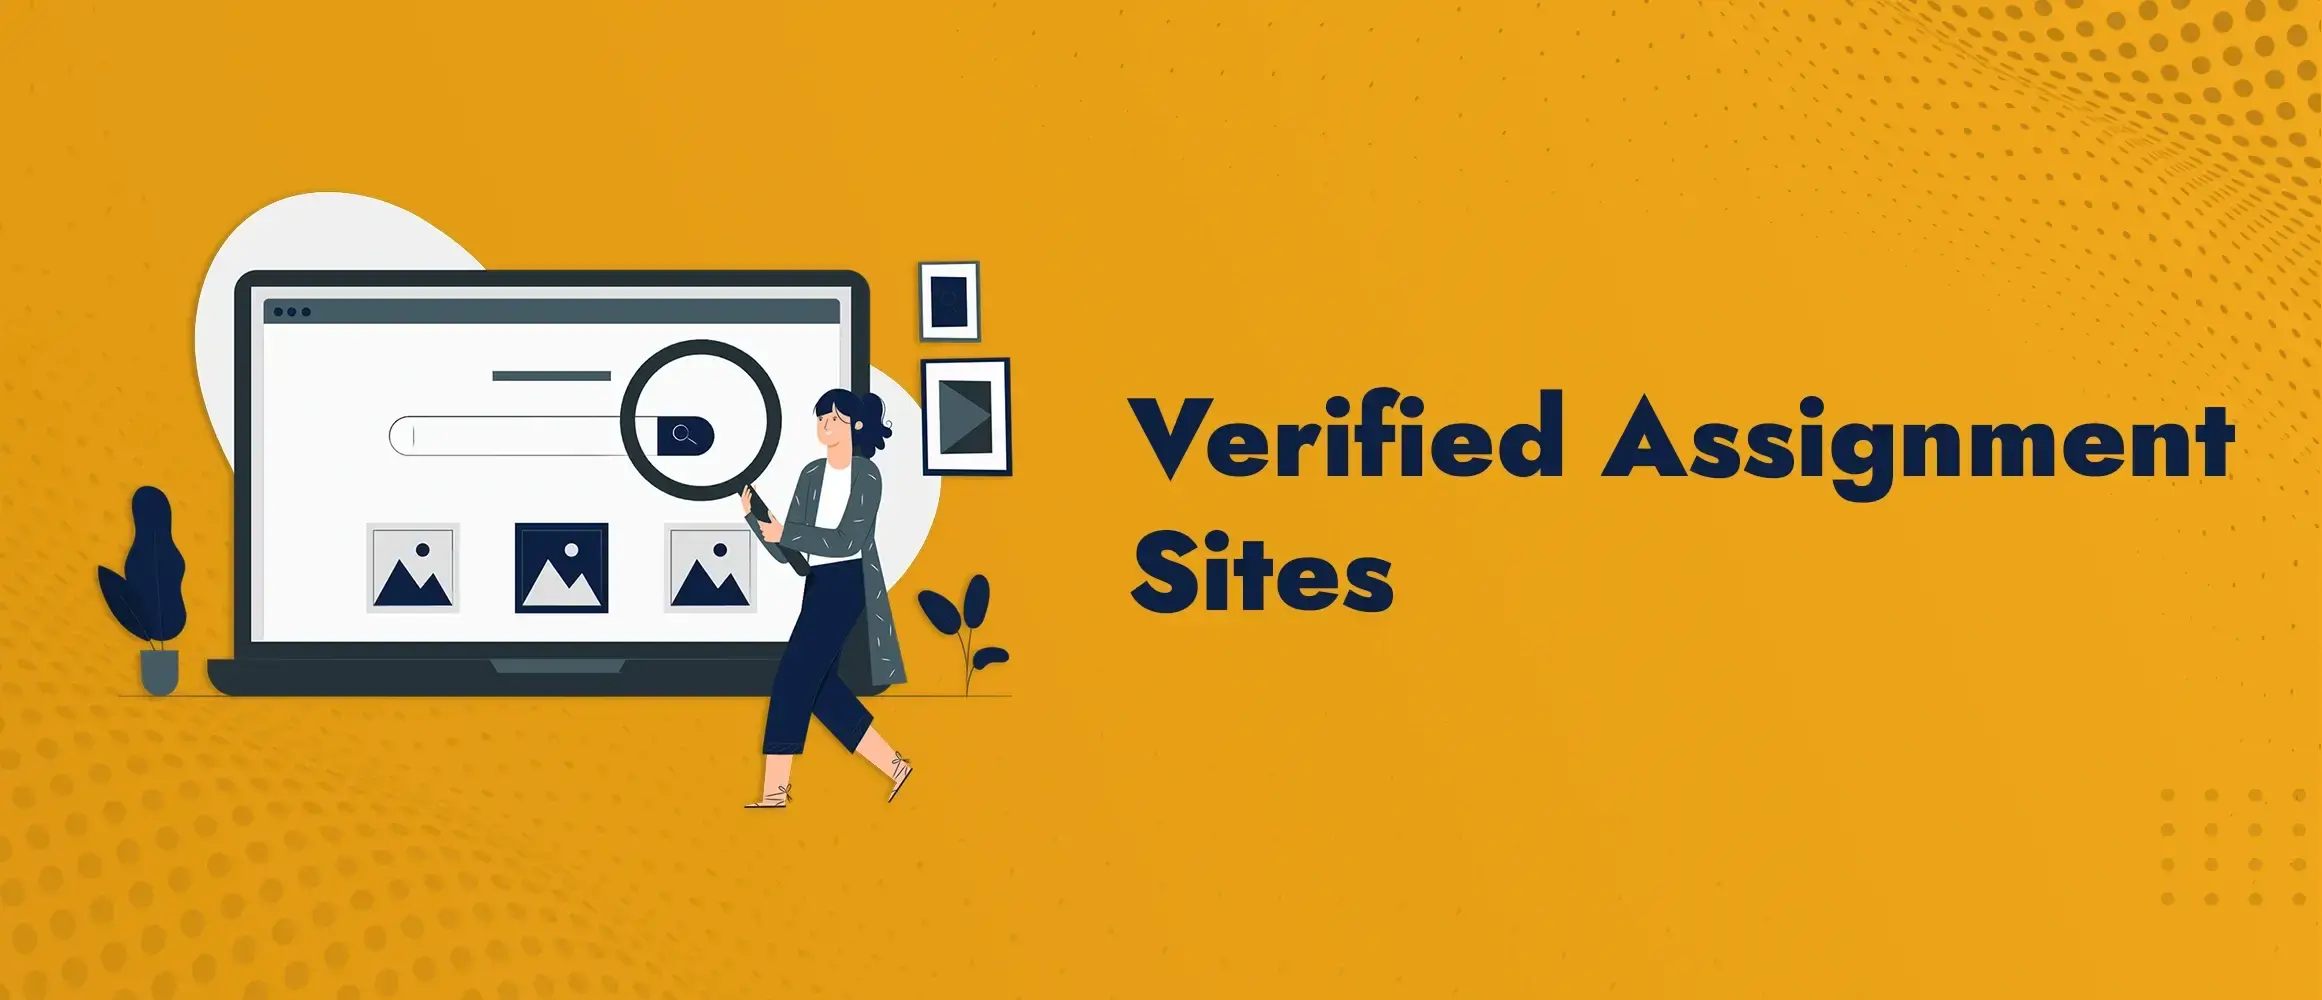 How to Verify Assignment Making Sites are Safe